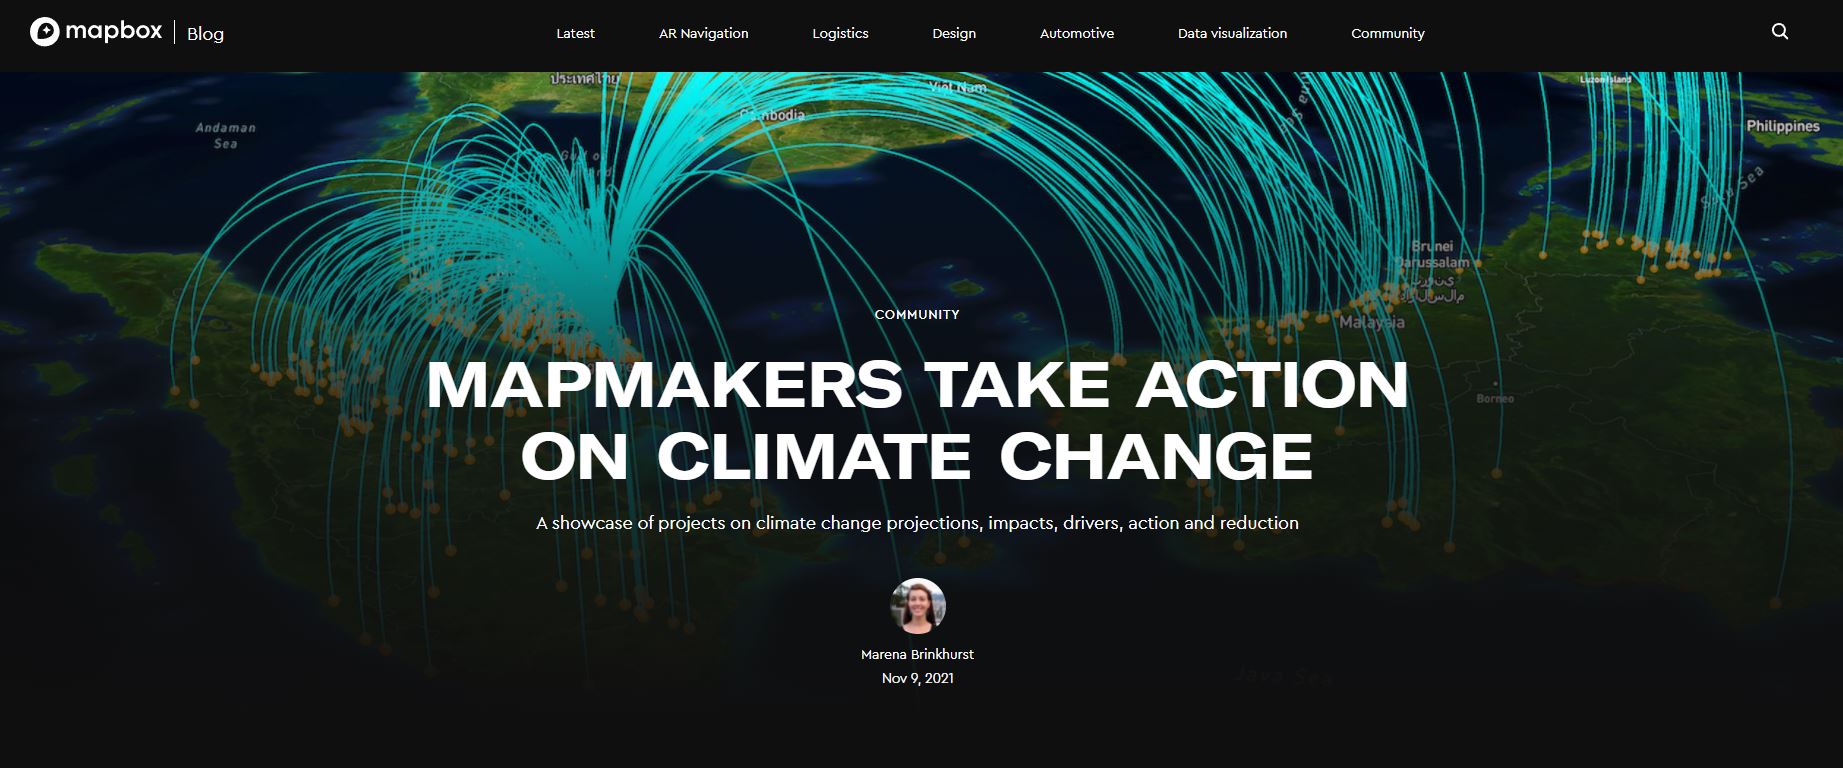 Mapbox supports several organizations for climate action, including Project NOAH